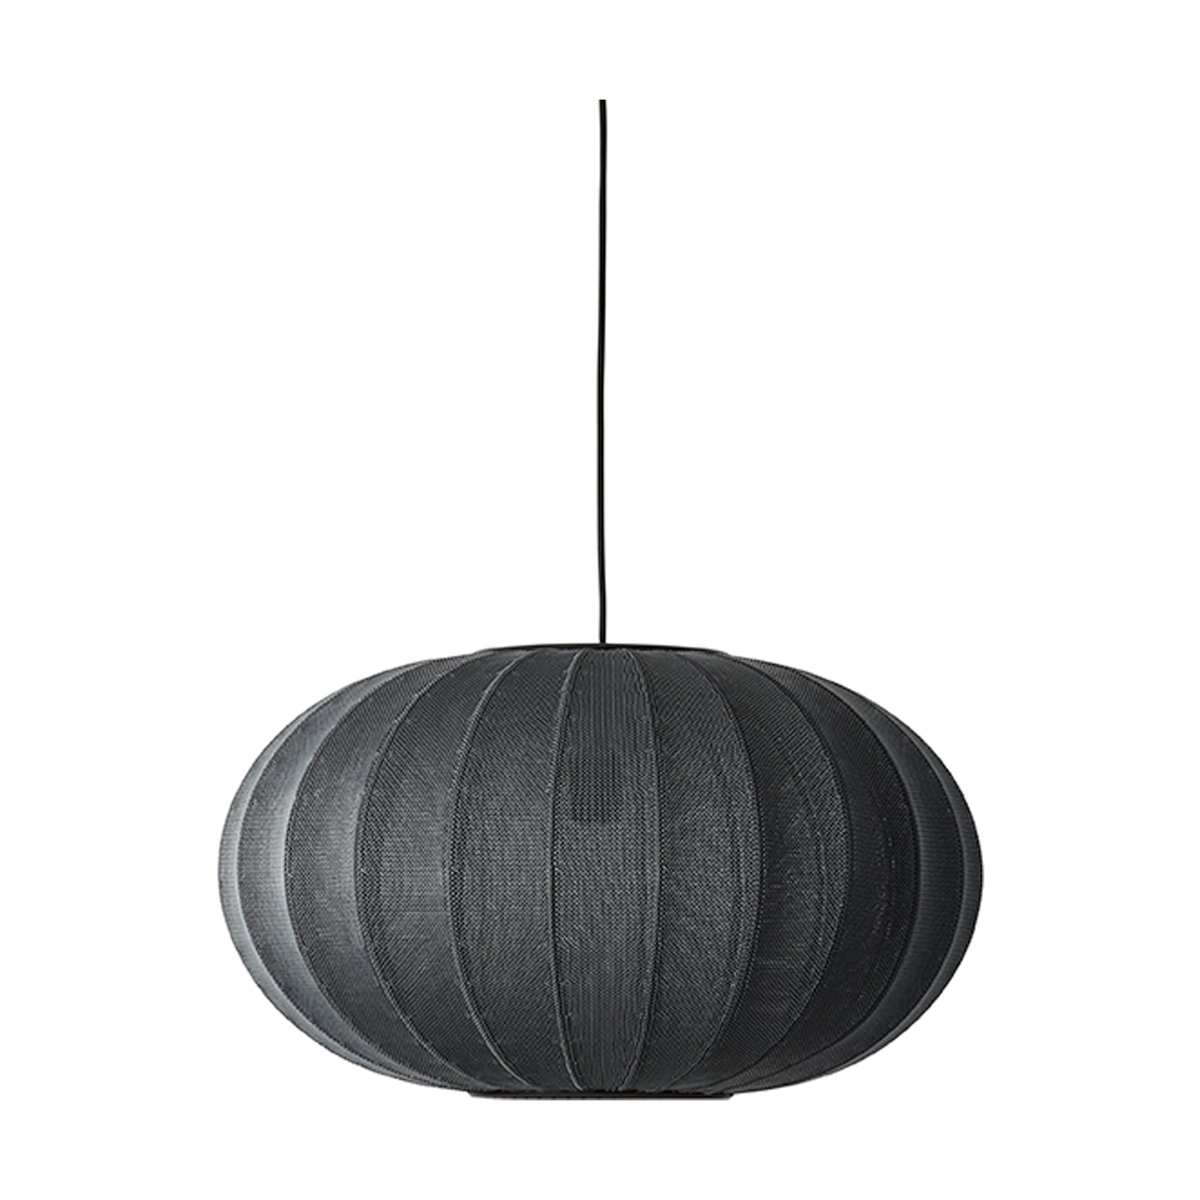 Made By Hand Knit-Wit 57 Oval hanglamp Black